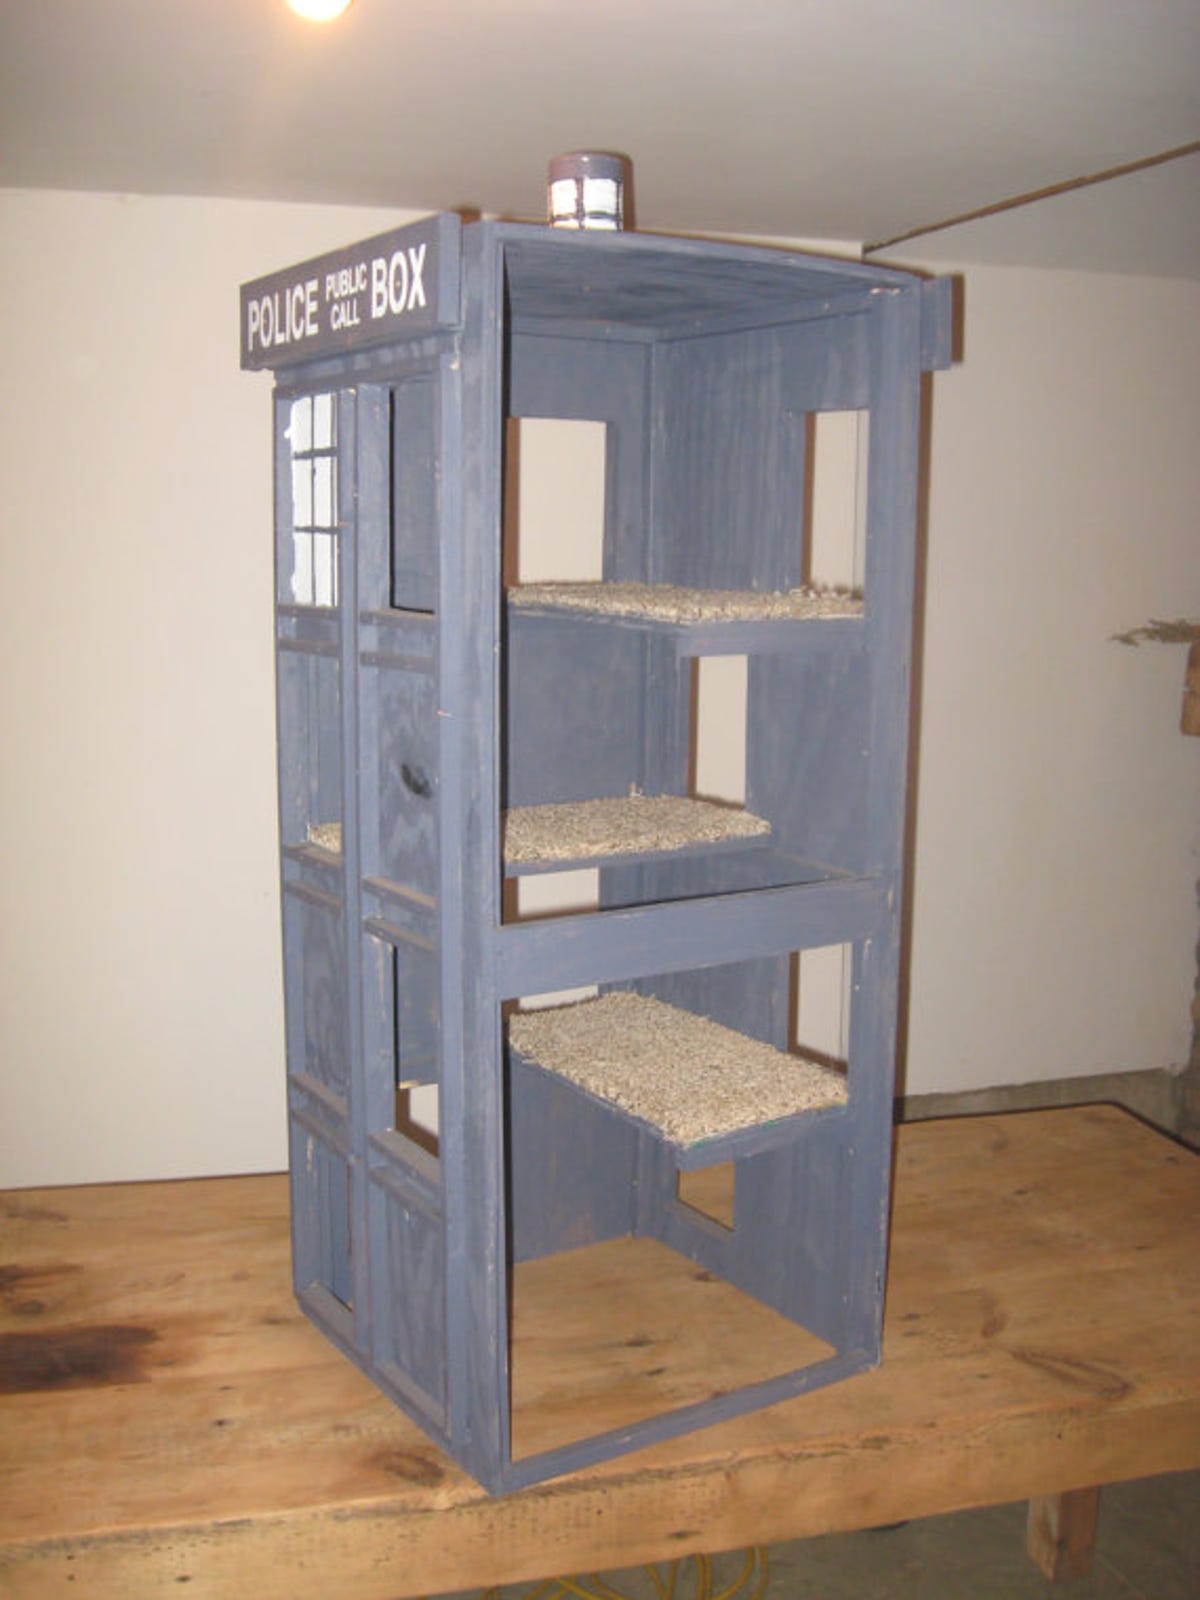 This "Doctor Who" Tardis cat condo may not be bigger on the inside than the outside, but it does have three levels.